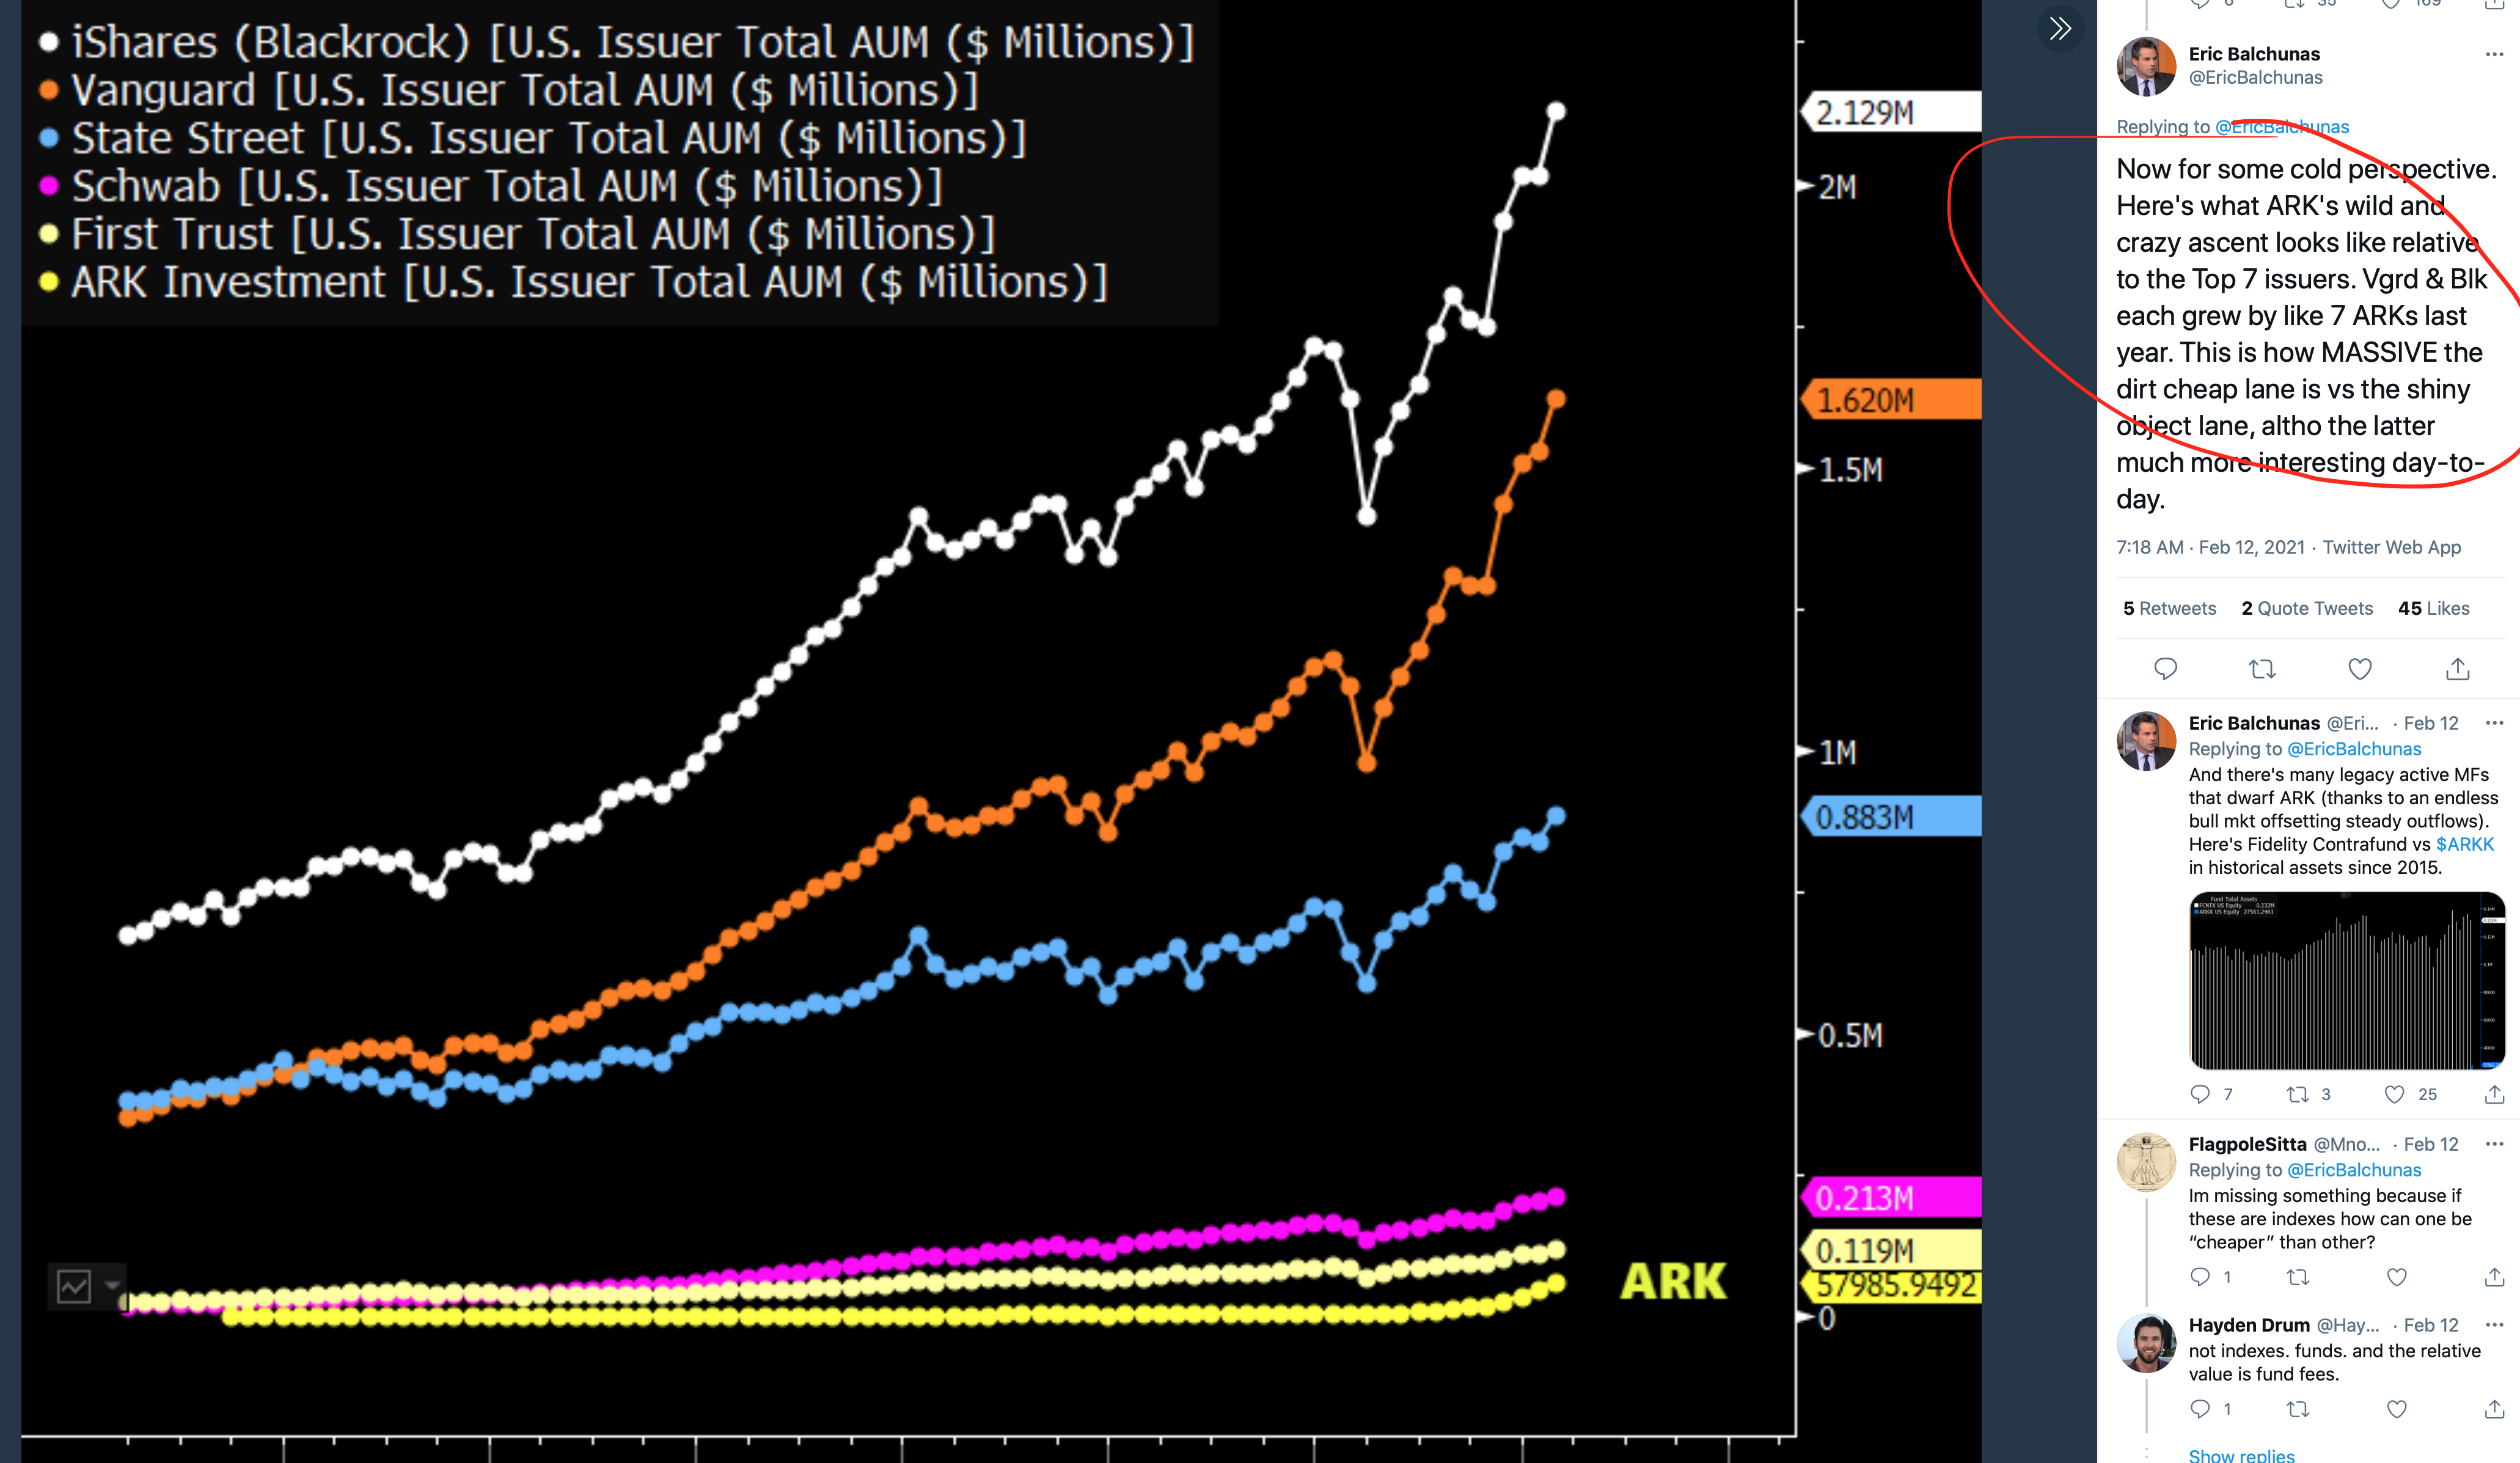 ARK vs. the rest of the ETF universe. ETFs are still dominated by the big players. Source: Twitter